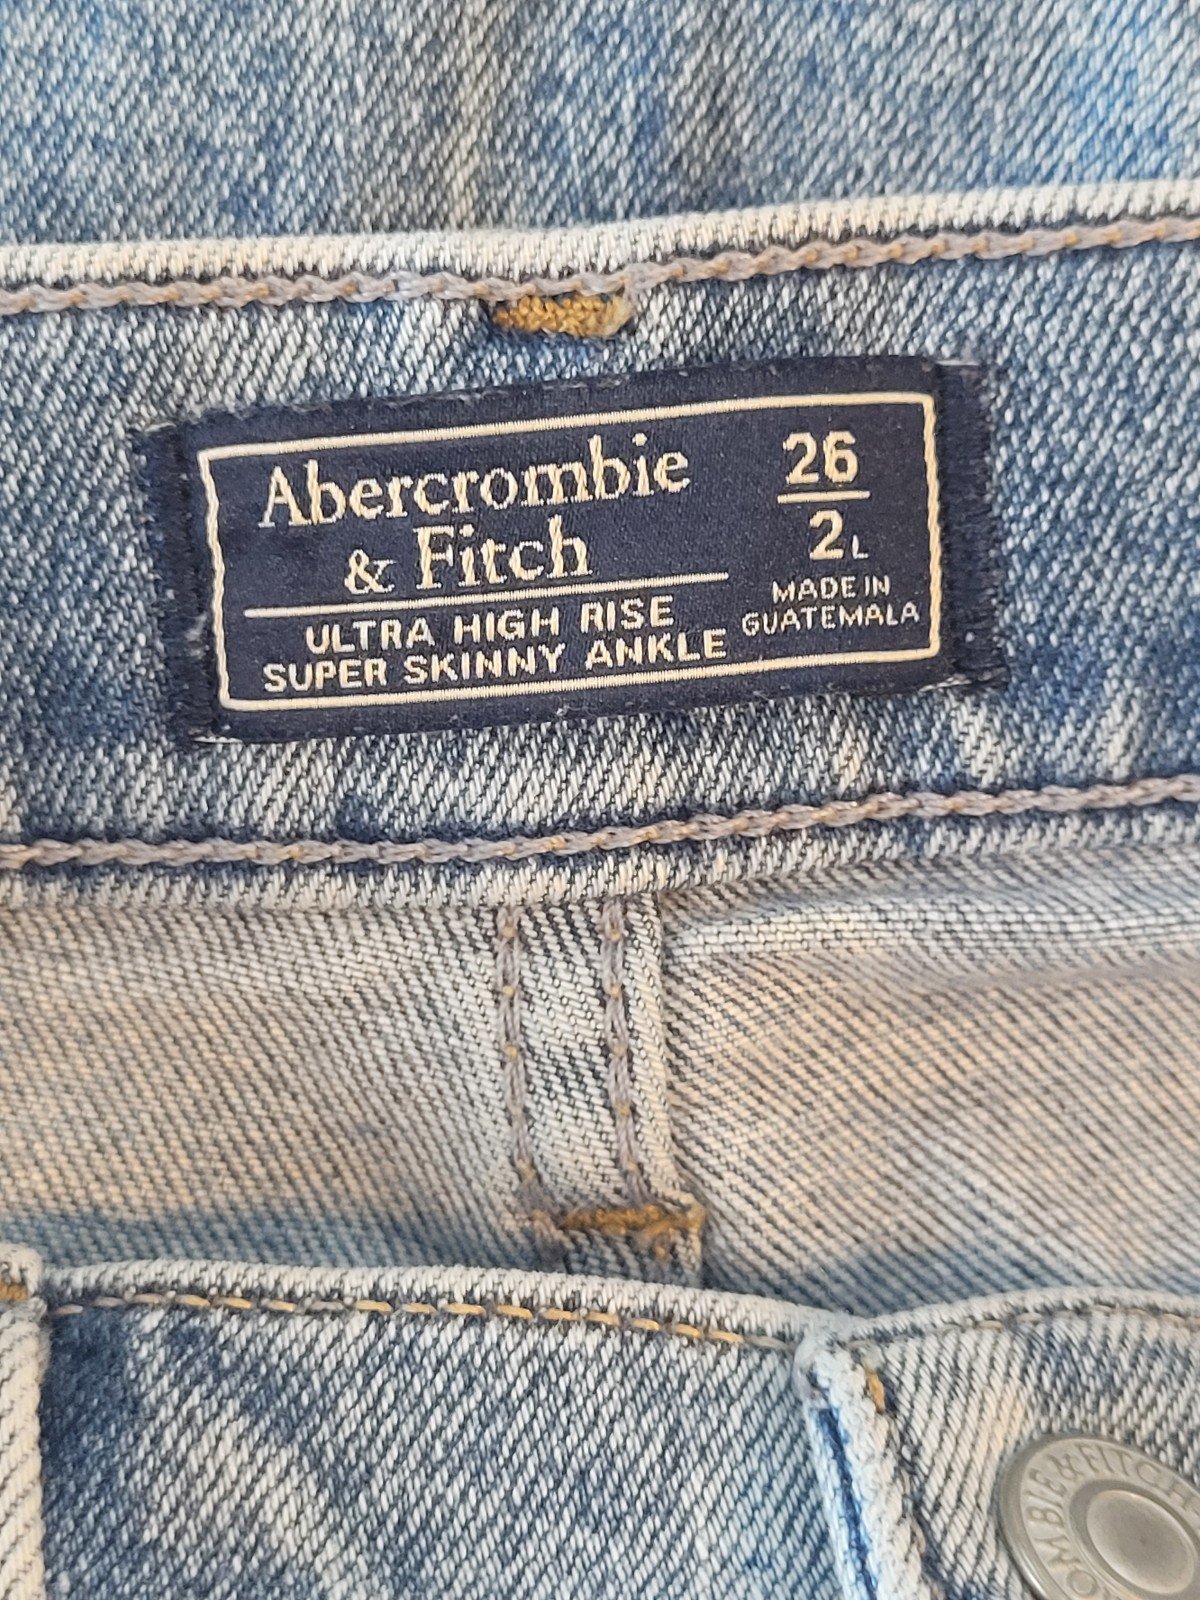 Popular Abercrombie & Fitch High-Rise Super Skinny Ankle Jeans Size 26 inch Long/Tall fSulKQ2xF on sale